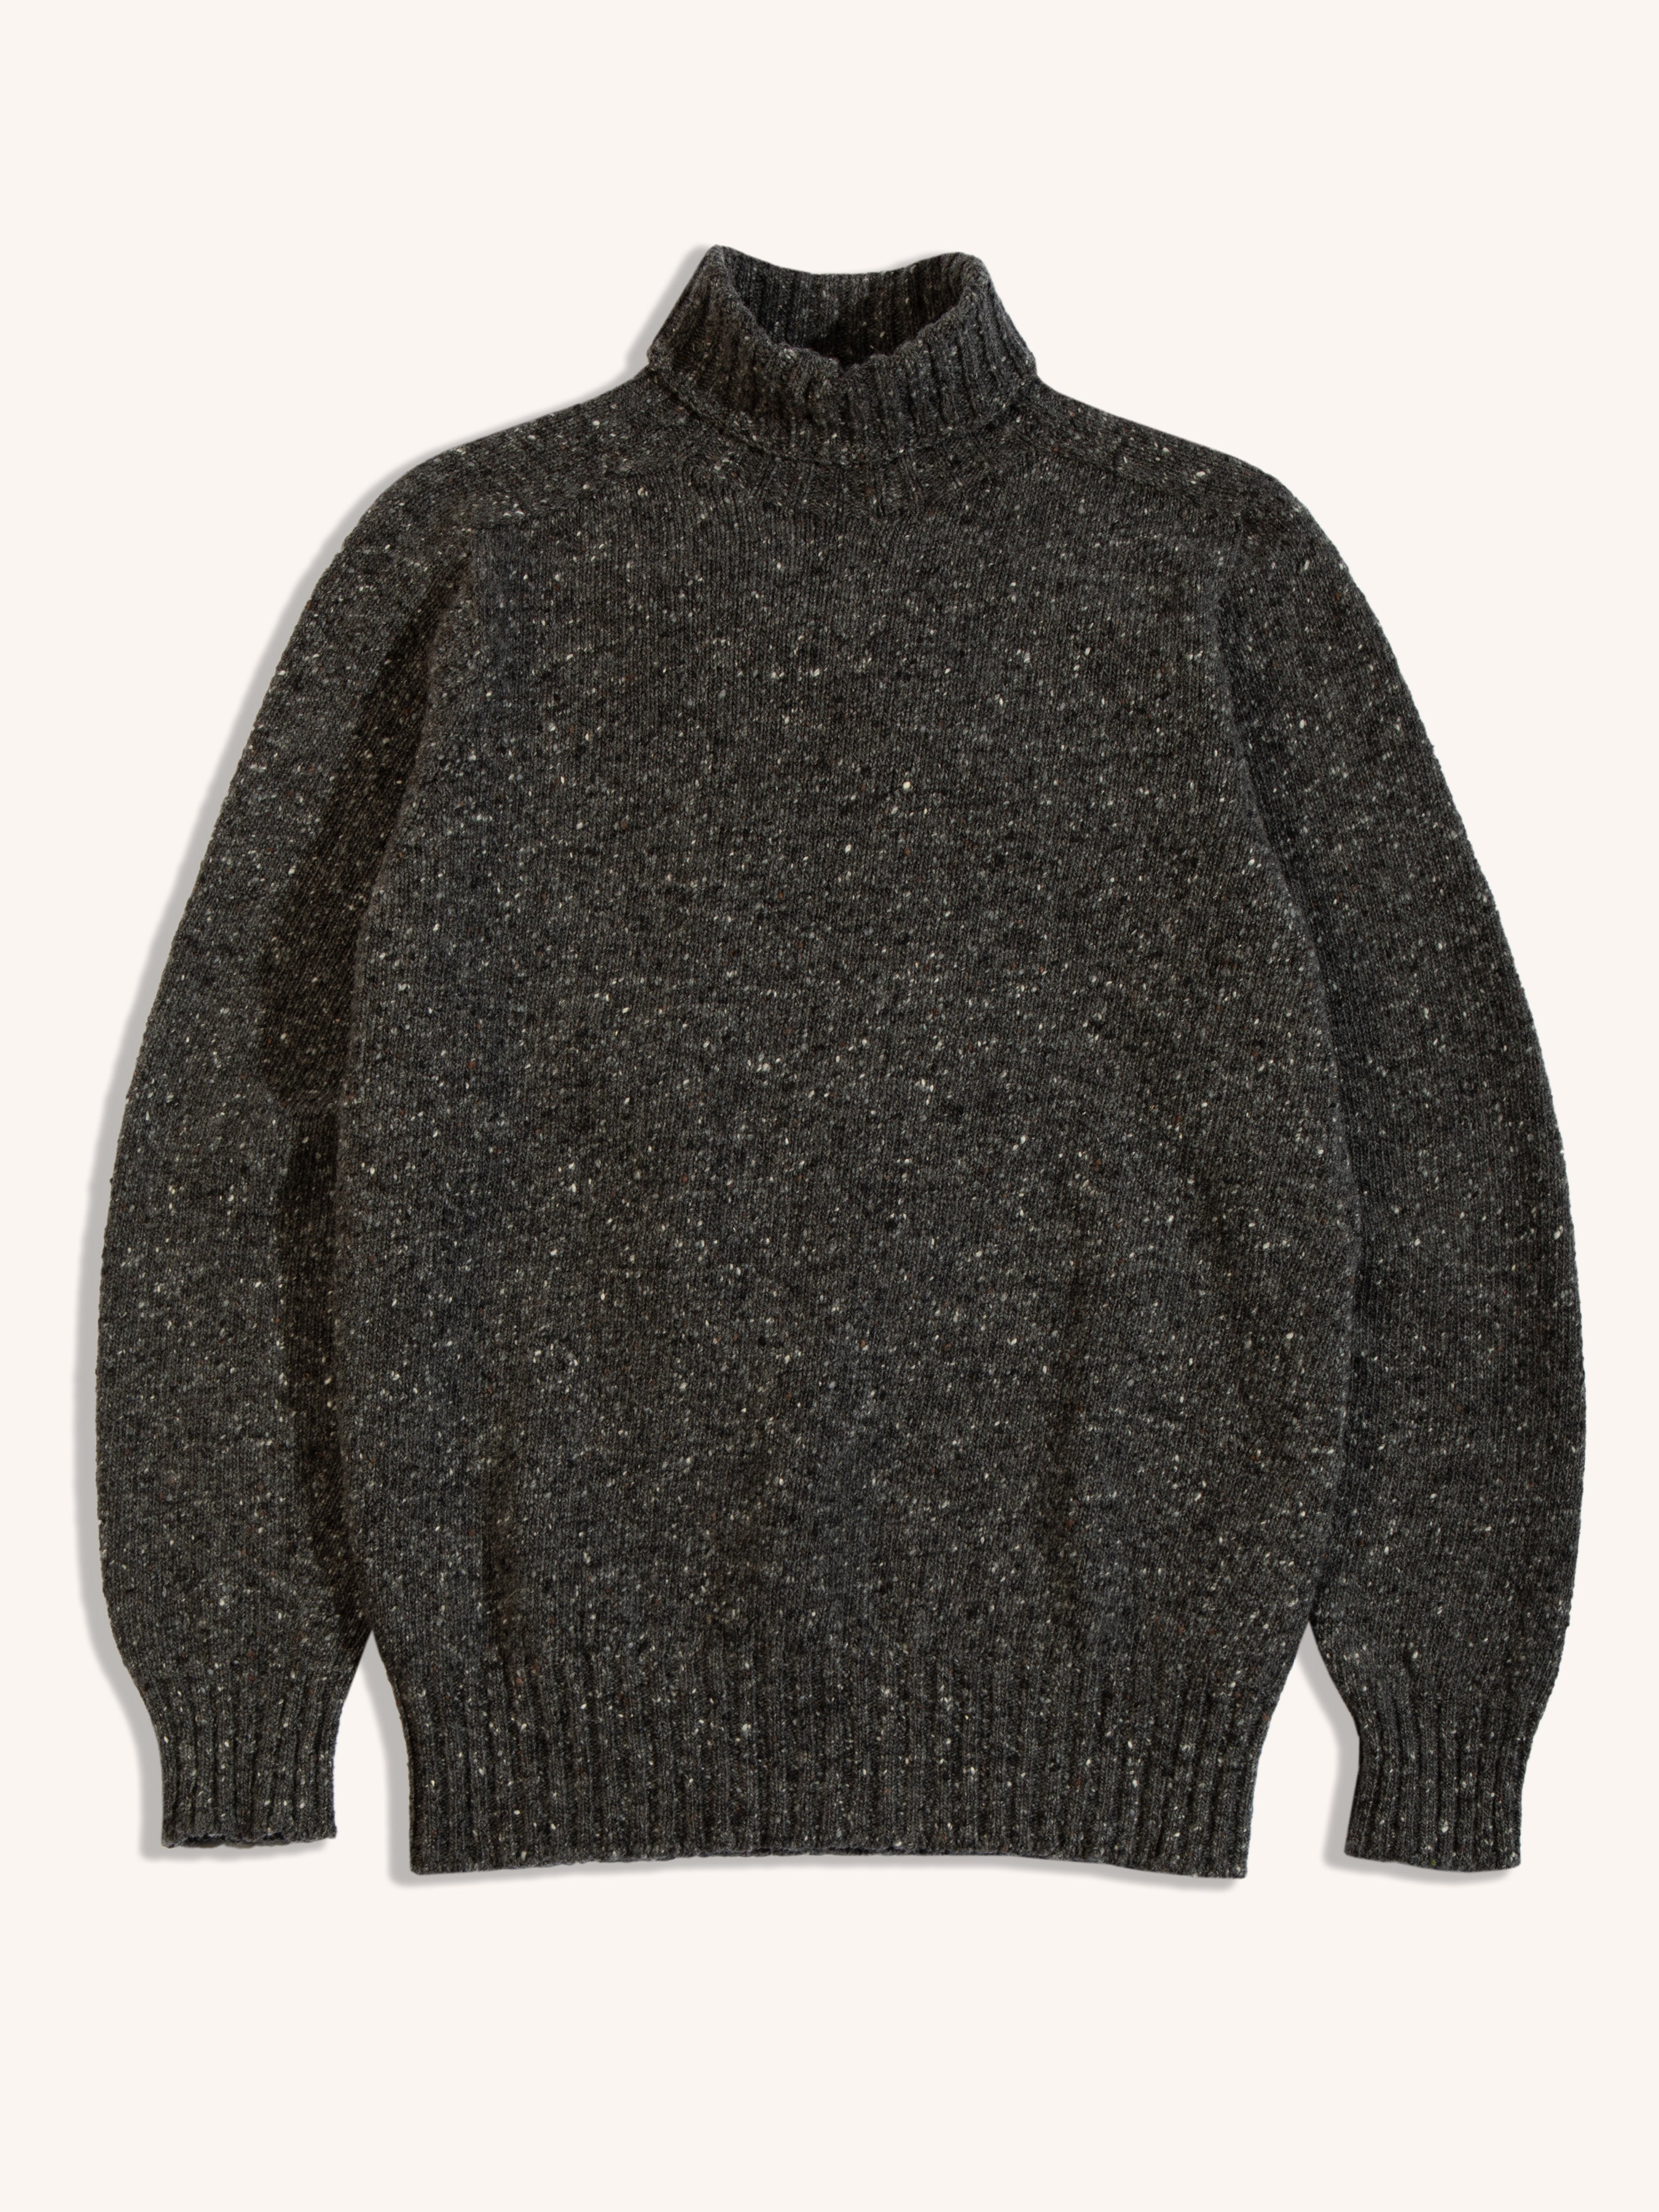 A charcoal grey sweater from menswear brand KESTIN, made from Donegal wool.